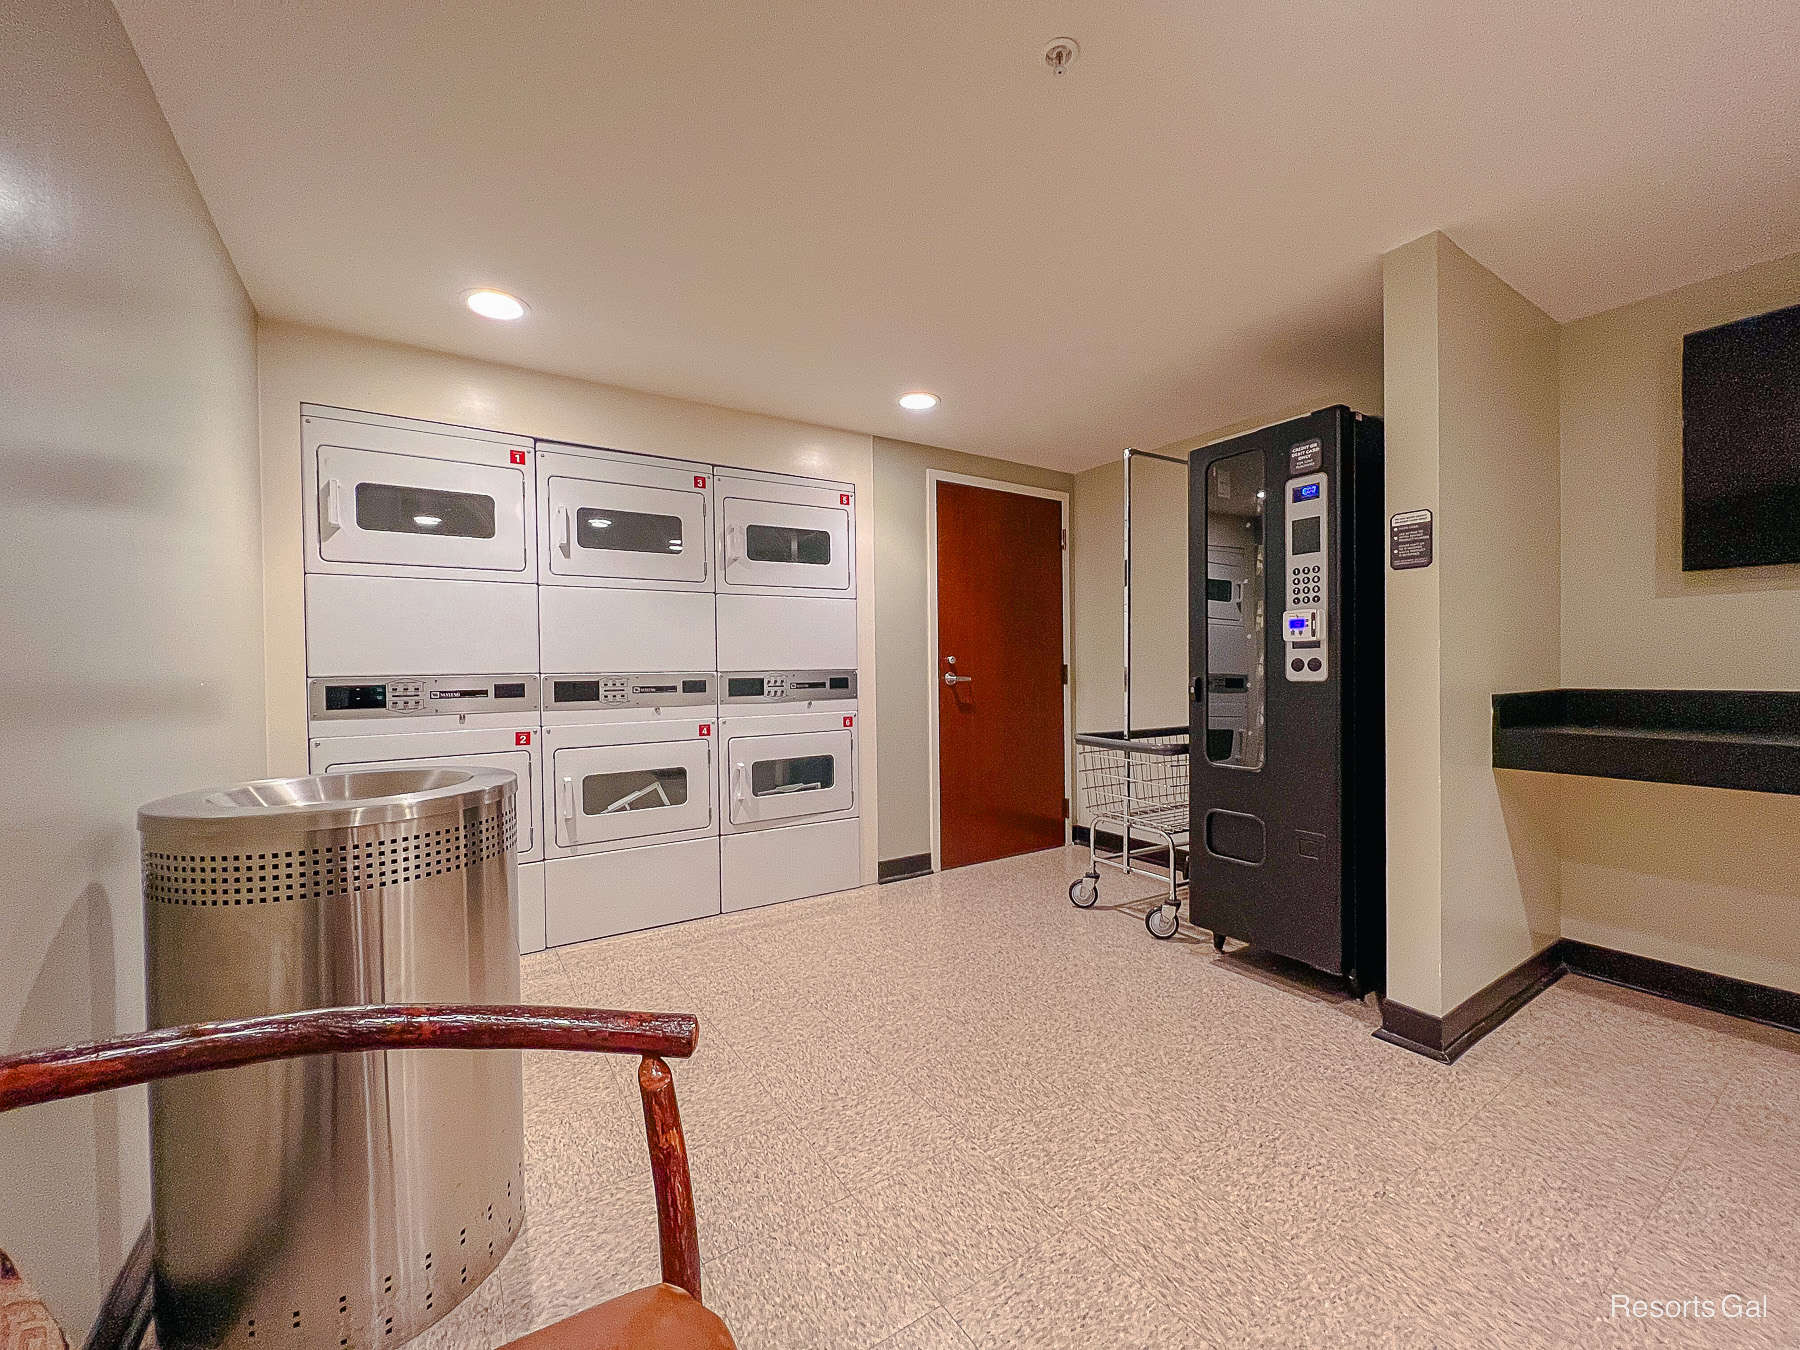 Laundry Options at Disney’s Wilderness Lodge (All Three!)